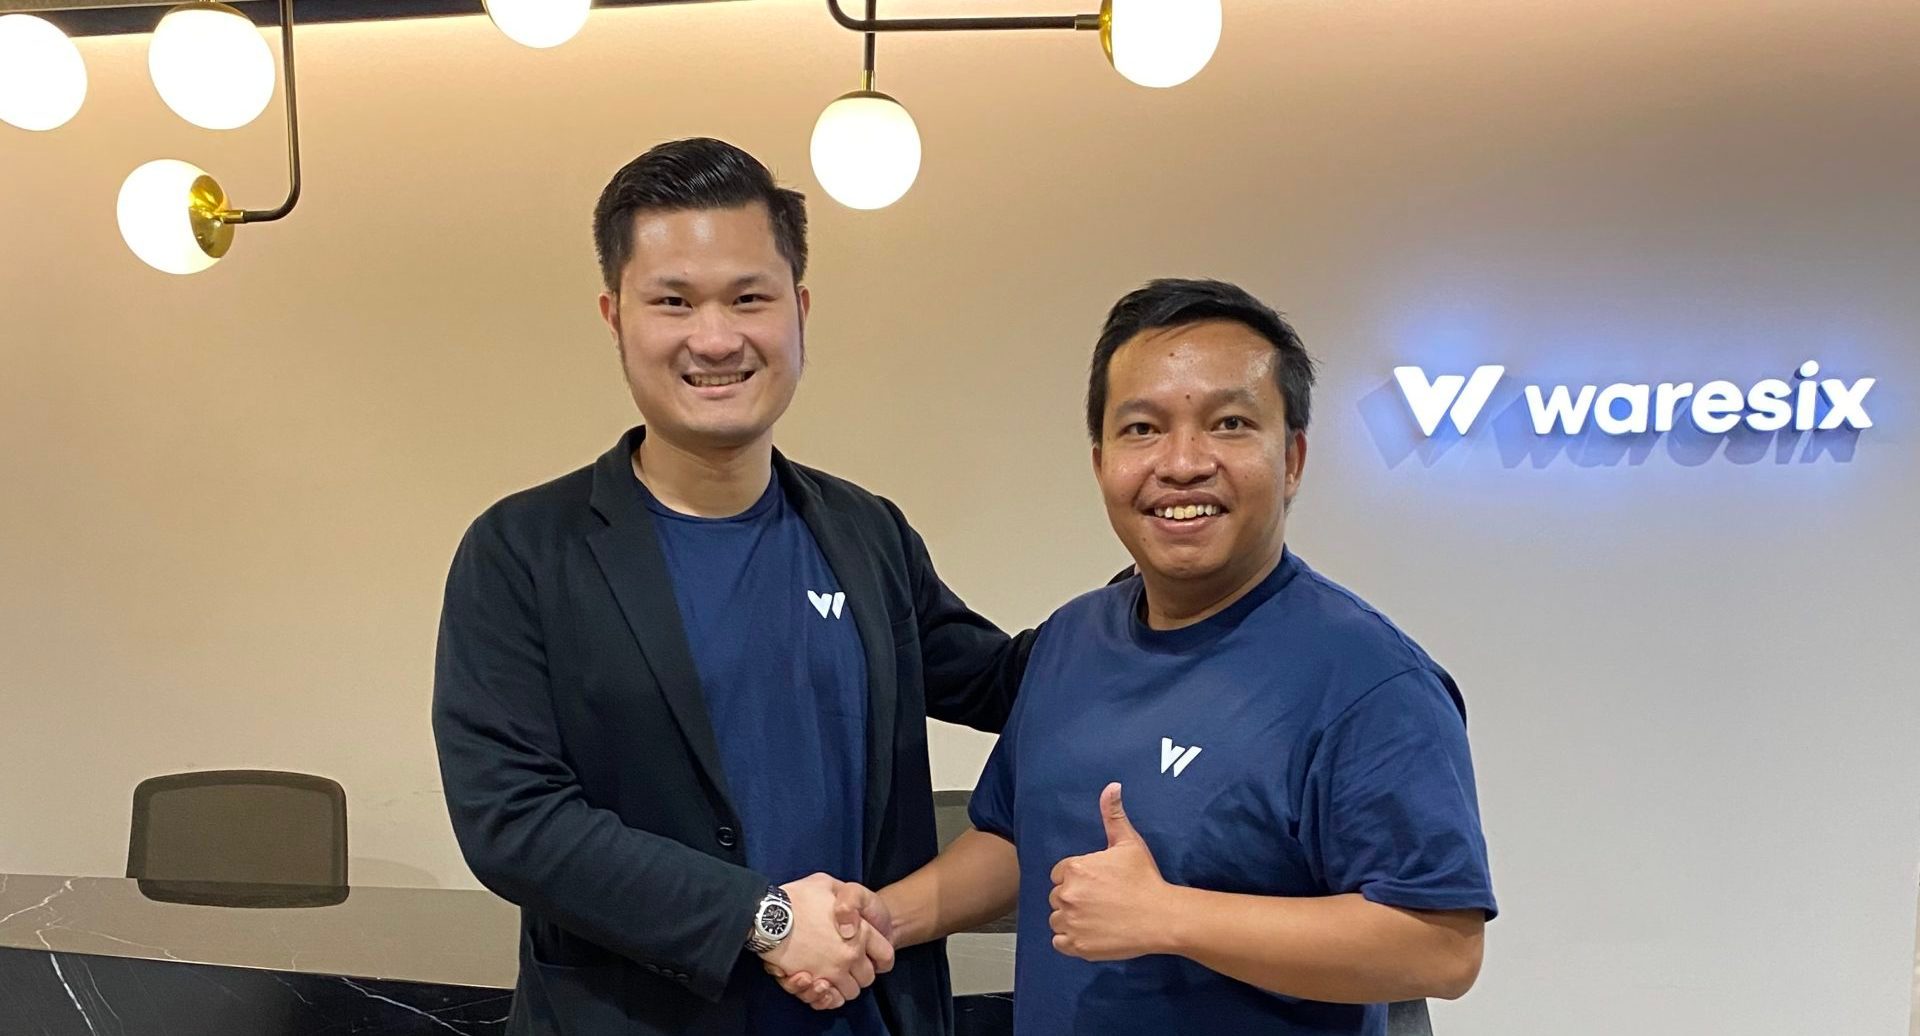 Indonesia's Waresix builds up first-mile logistics capabilities with Trukita acquisition